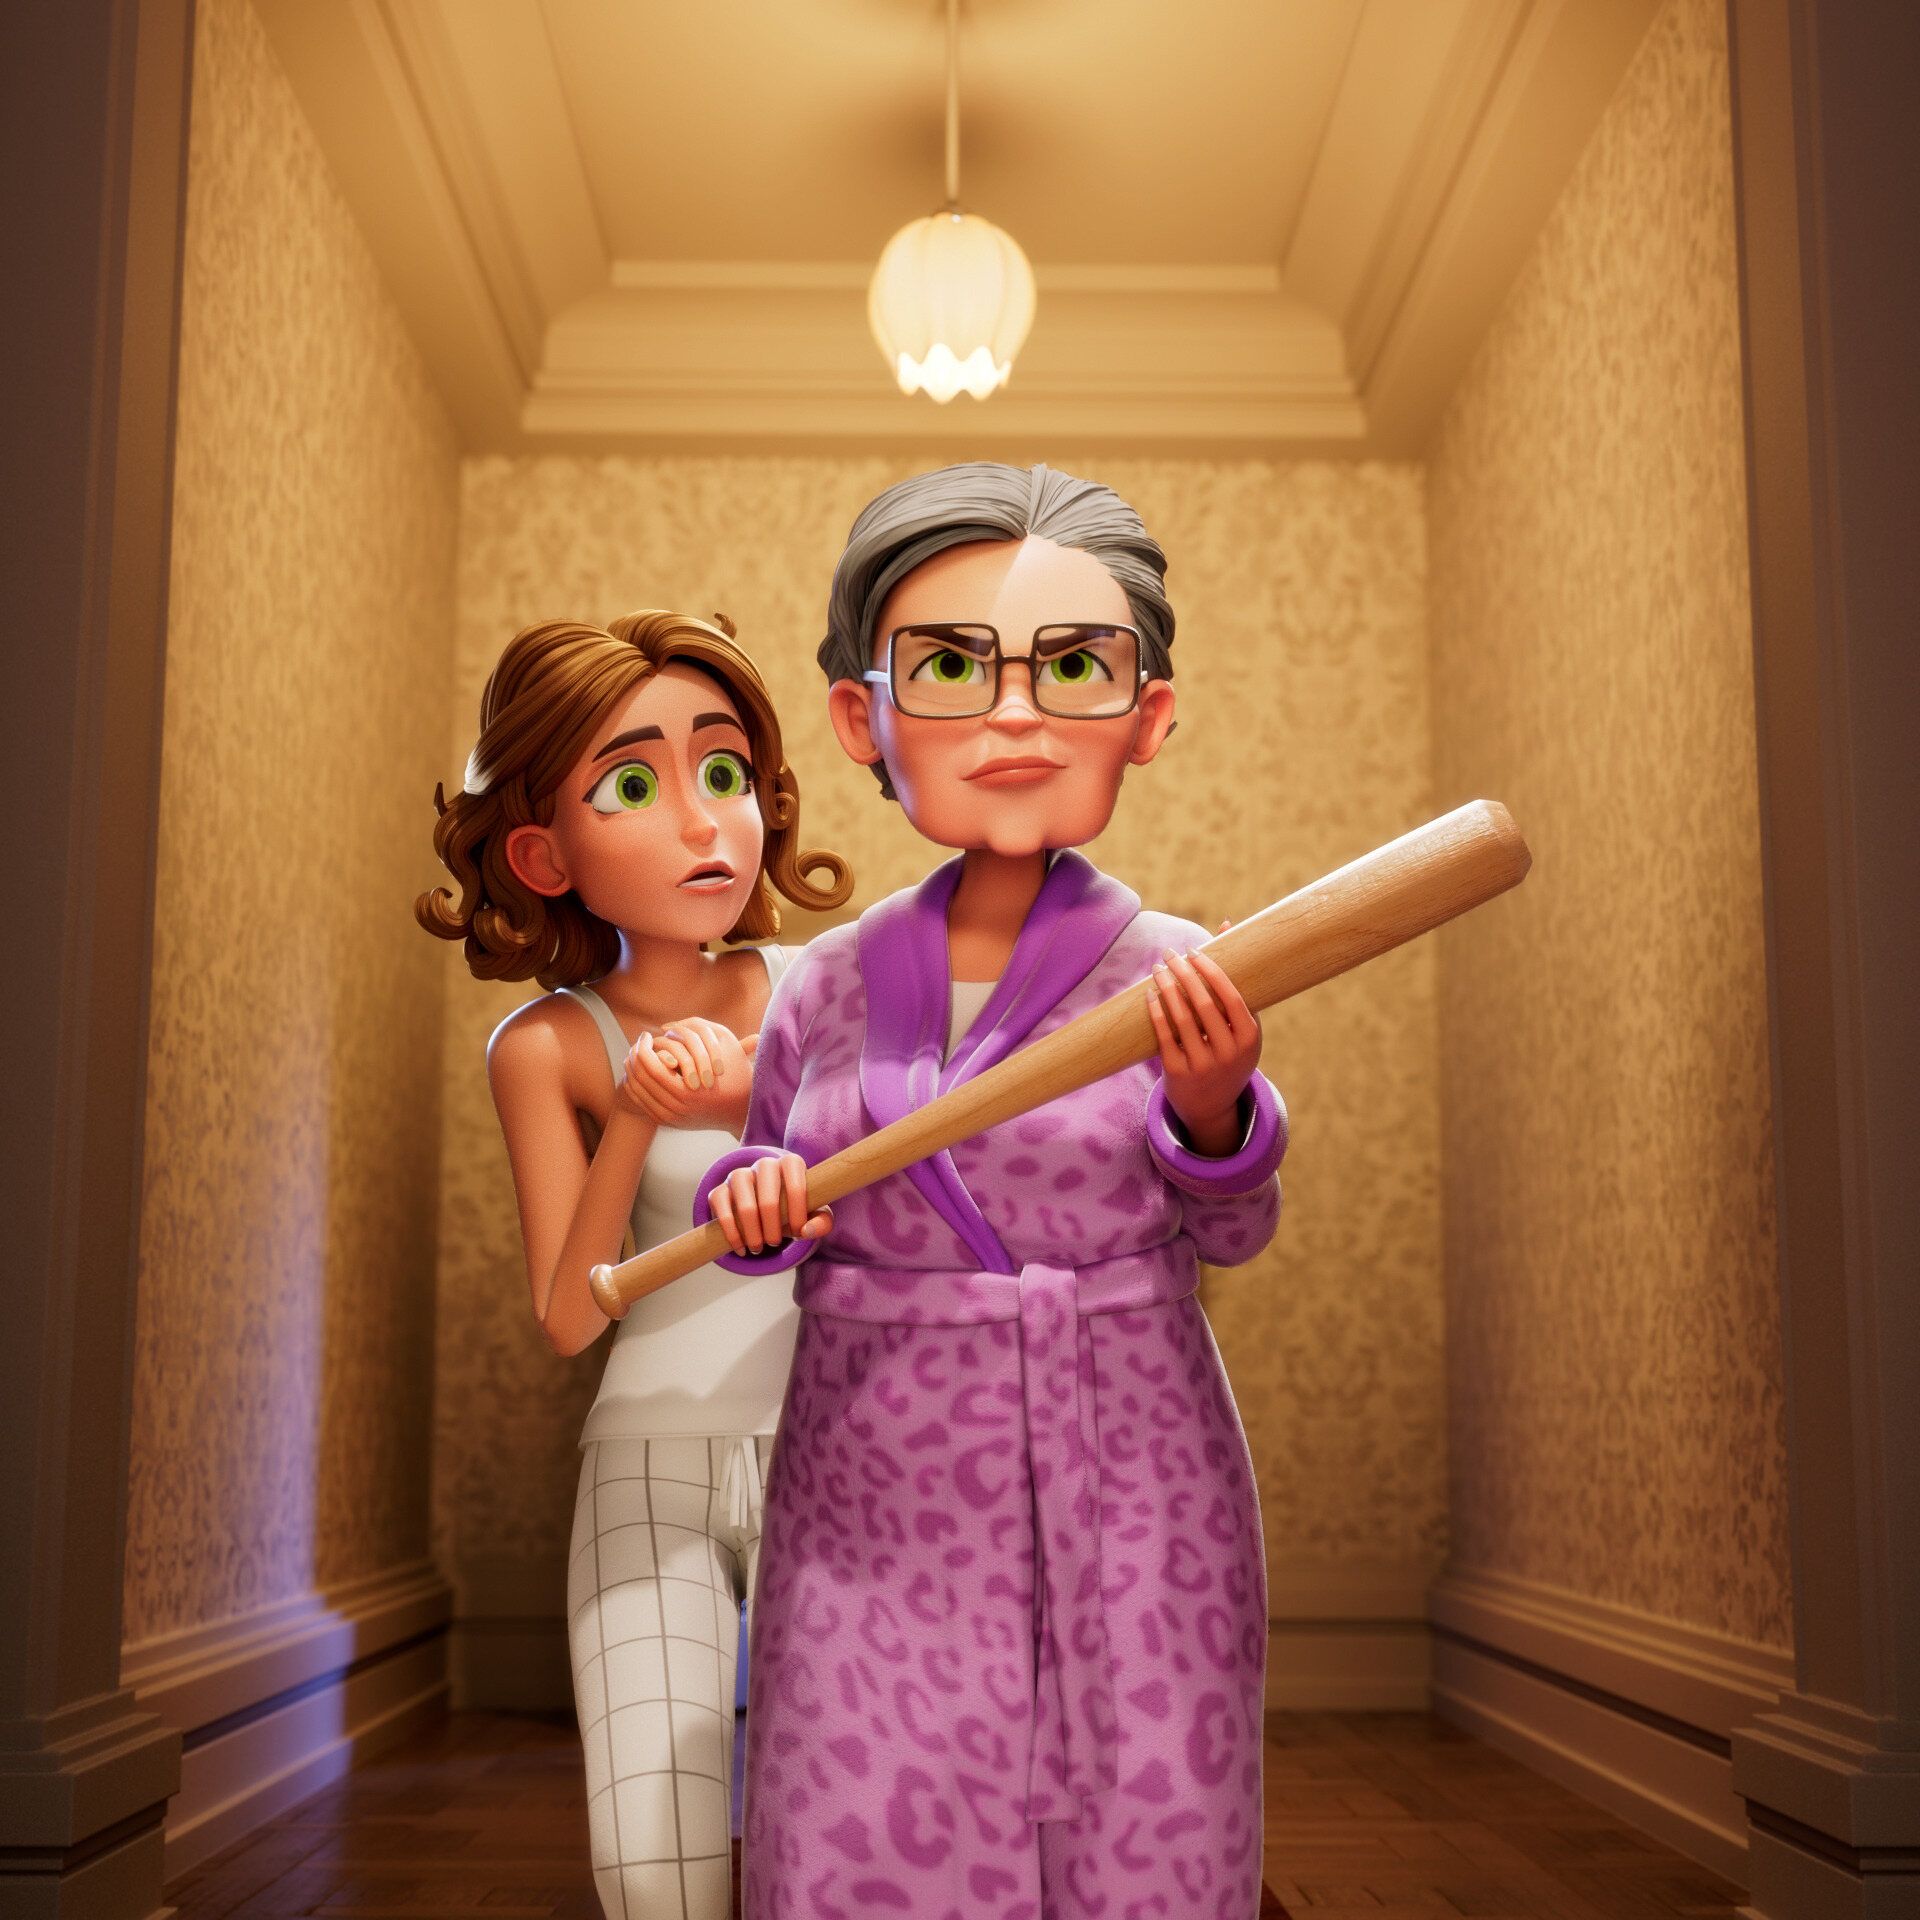 Grandma holding a baseball bat, while Maddie is looking scared